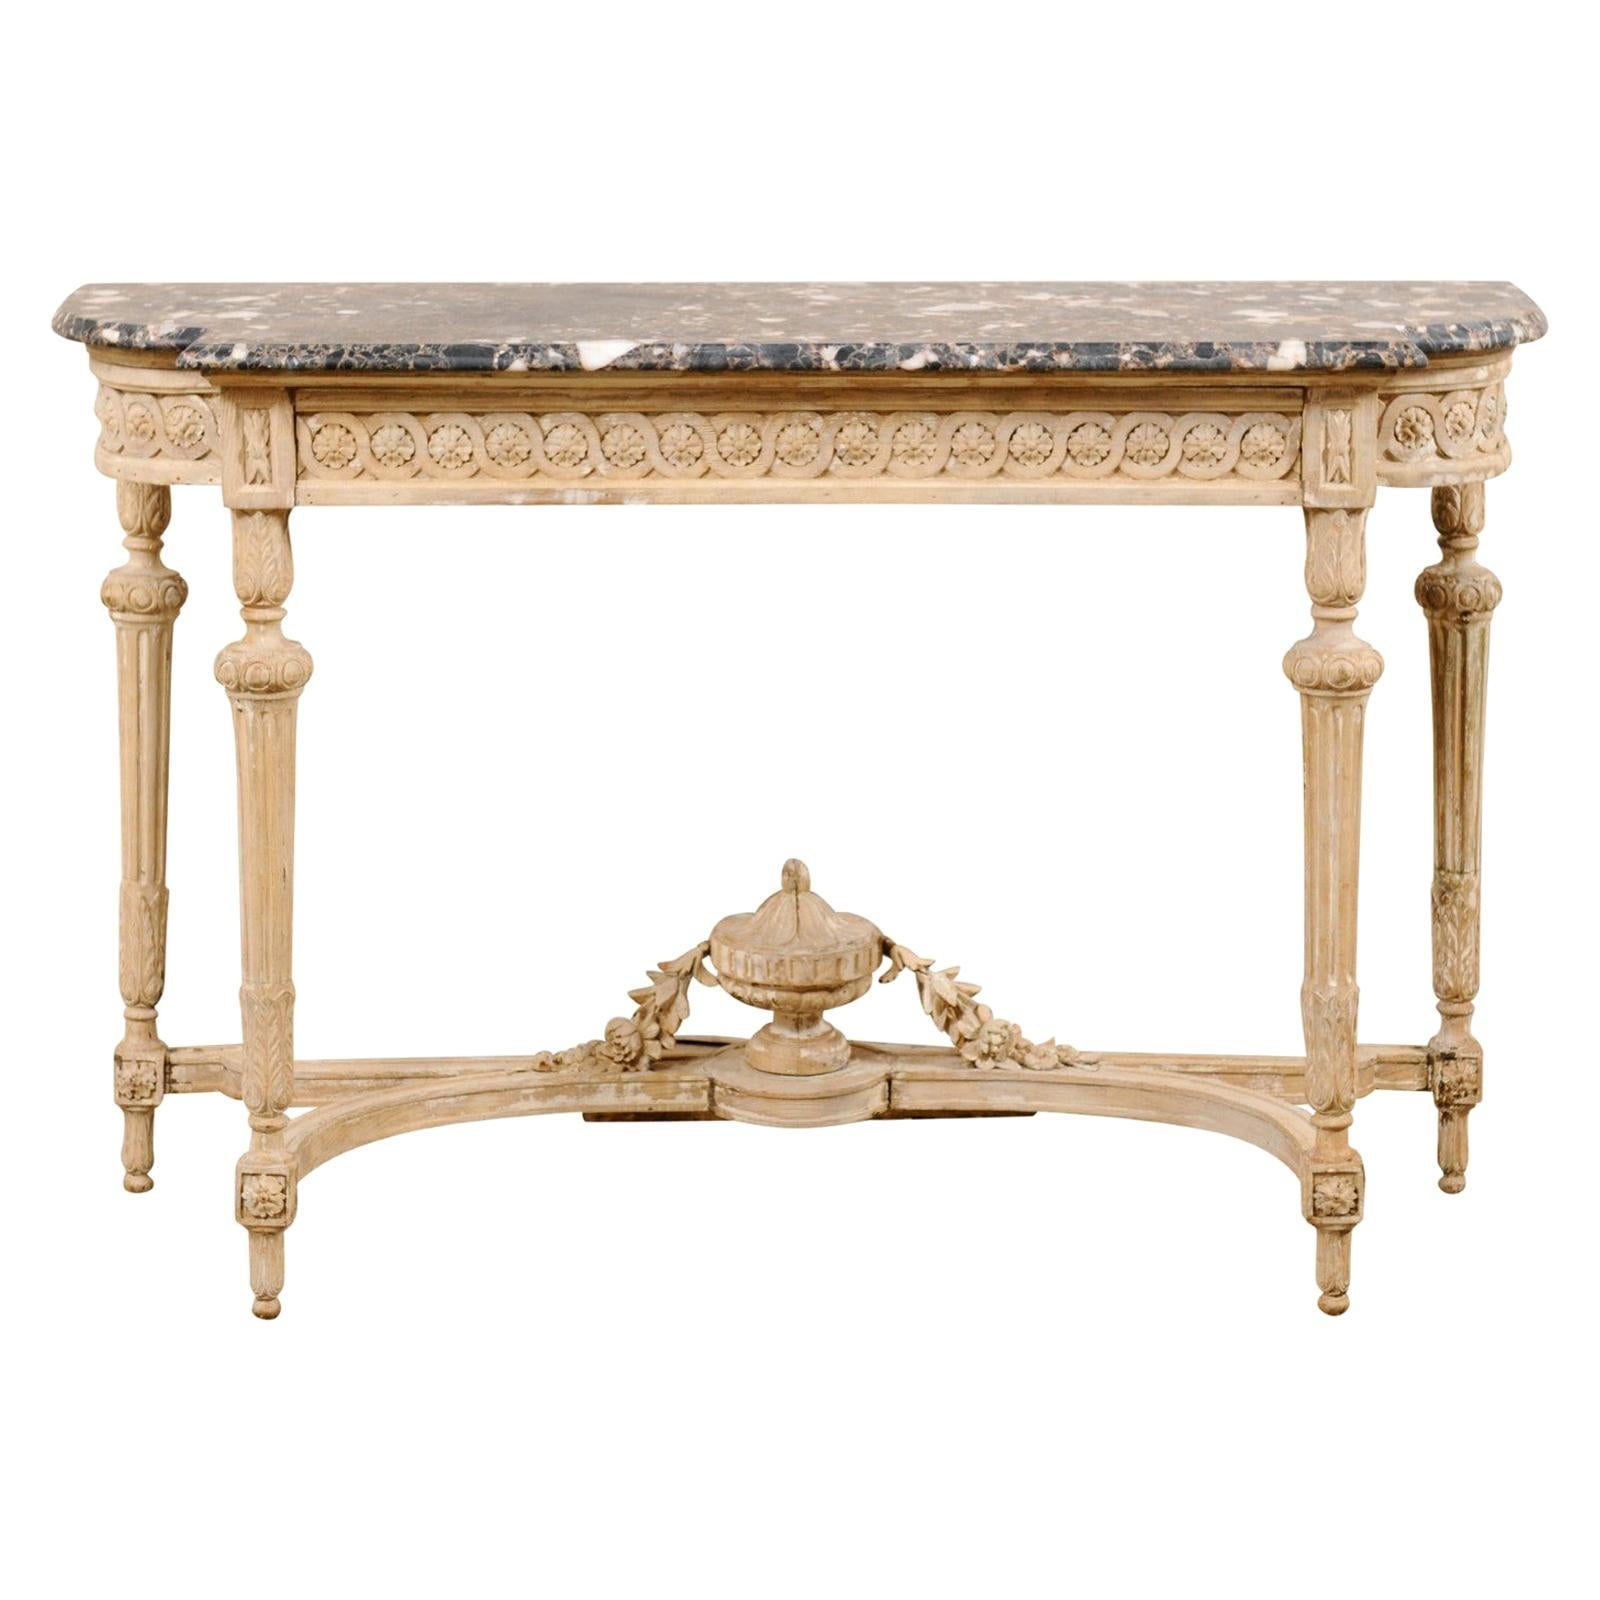 Antique French Marble-Top Console Table with Carved Urn & Foliage at Underside